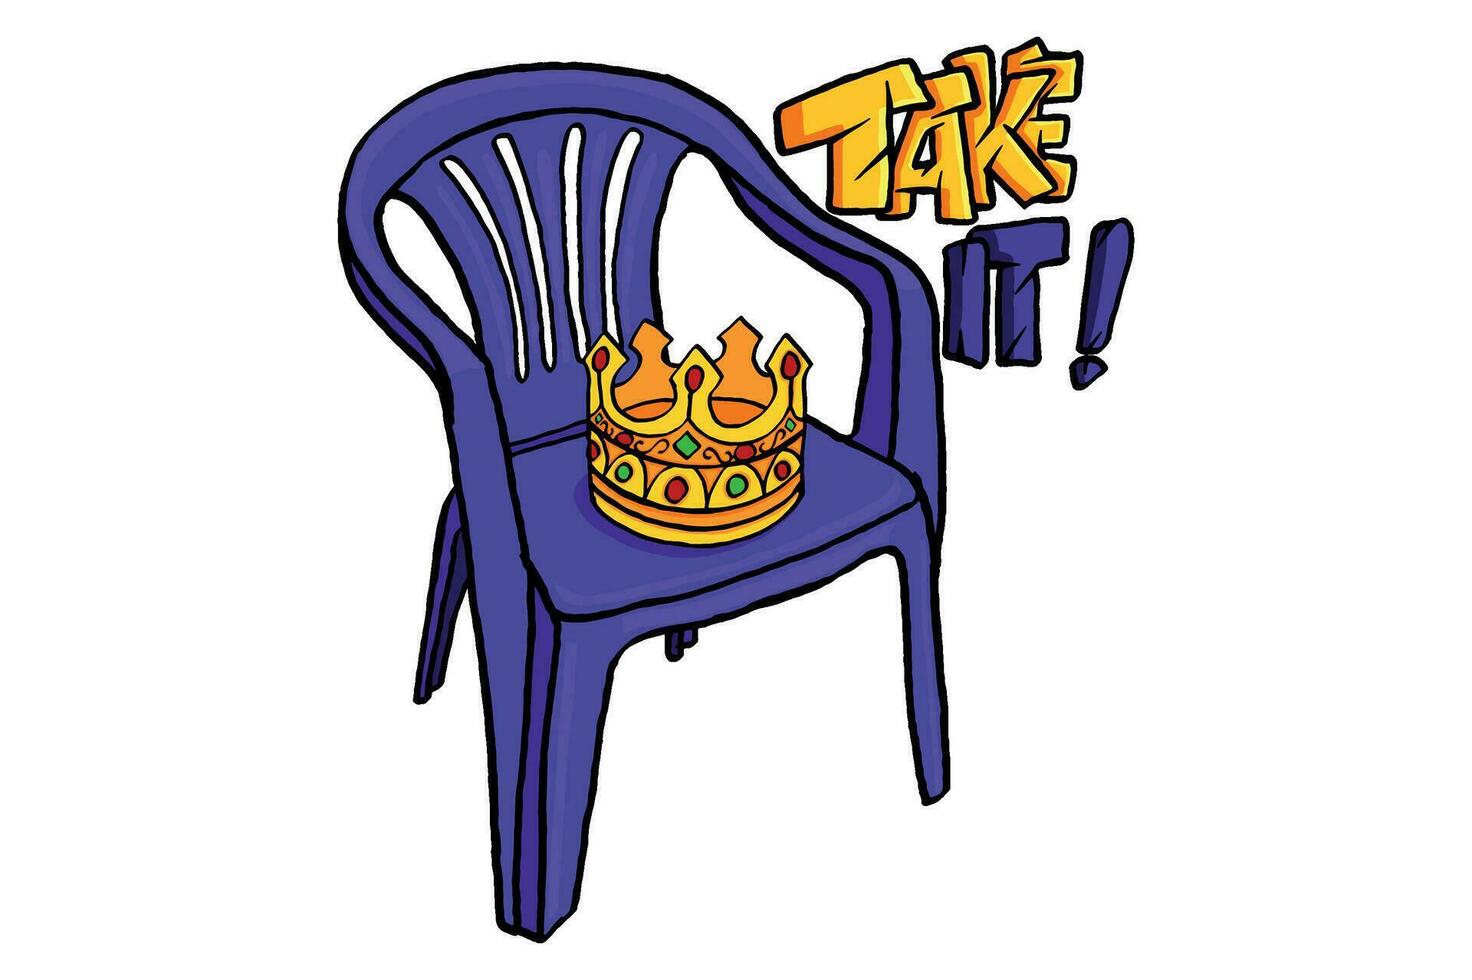 Plastic Chair Throne and King Crown vector